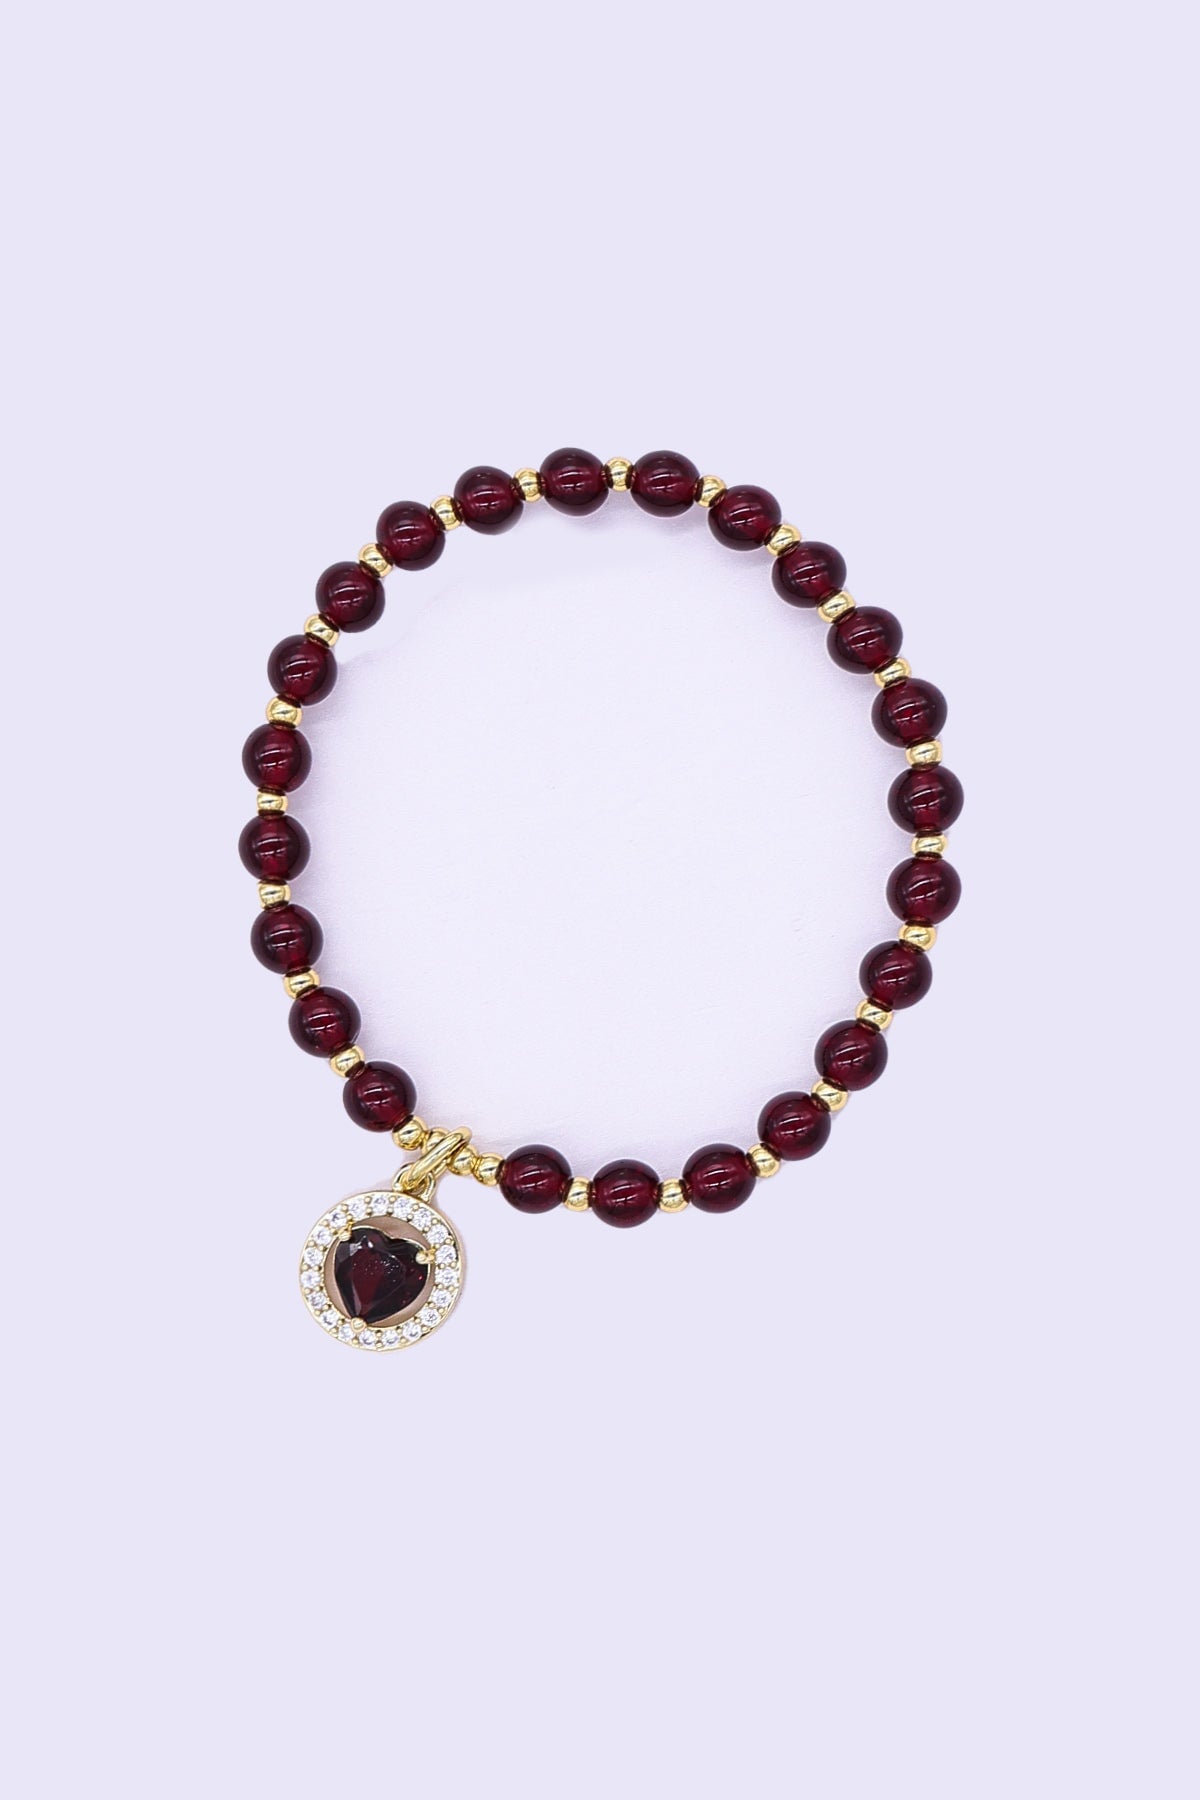 7 Garnet Birthstone Jewelry Pieces That Need To Be In Your Cart RN   Angara Blog